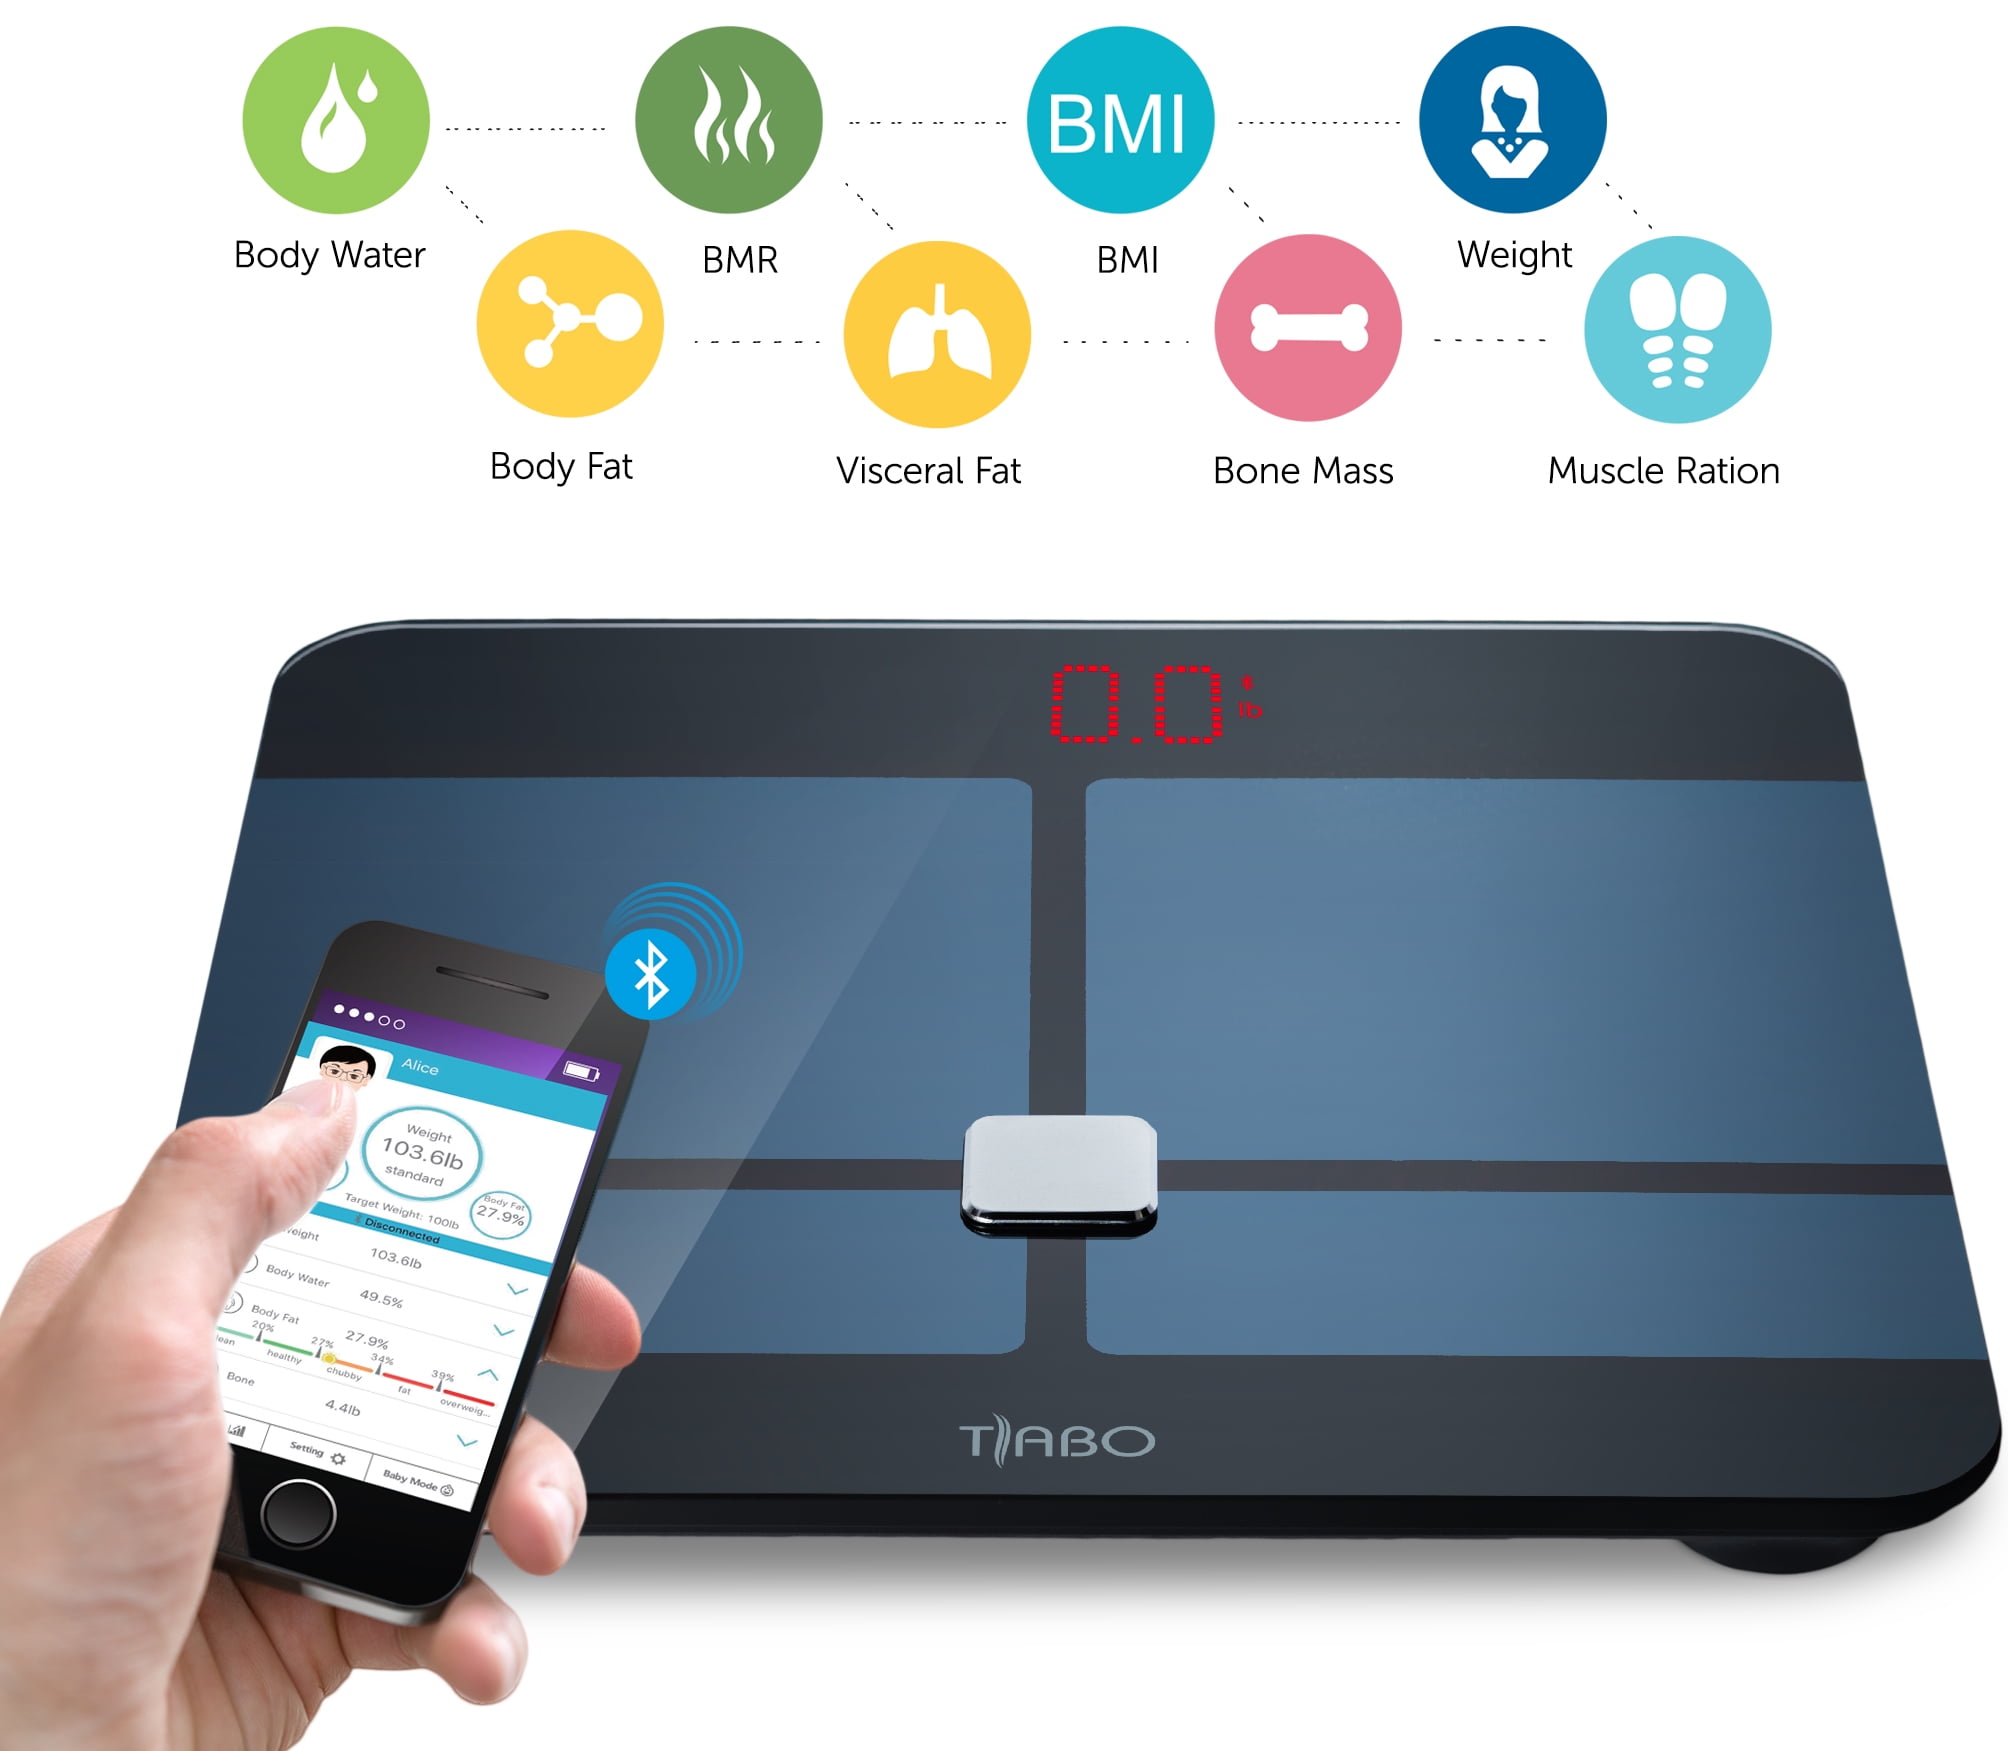 BMI Bluetooth Body Fat Scale - With App for IOS and Android Wireless  Digital Bathroom Scale – Measures Body weight, Body Water, Muscle Ratio,  Body Fat, BMI, Bone Mass BMR & Visceral